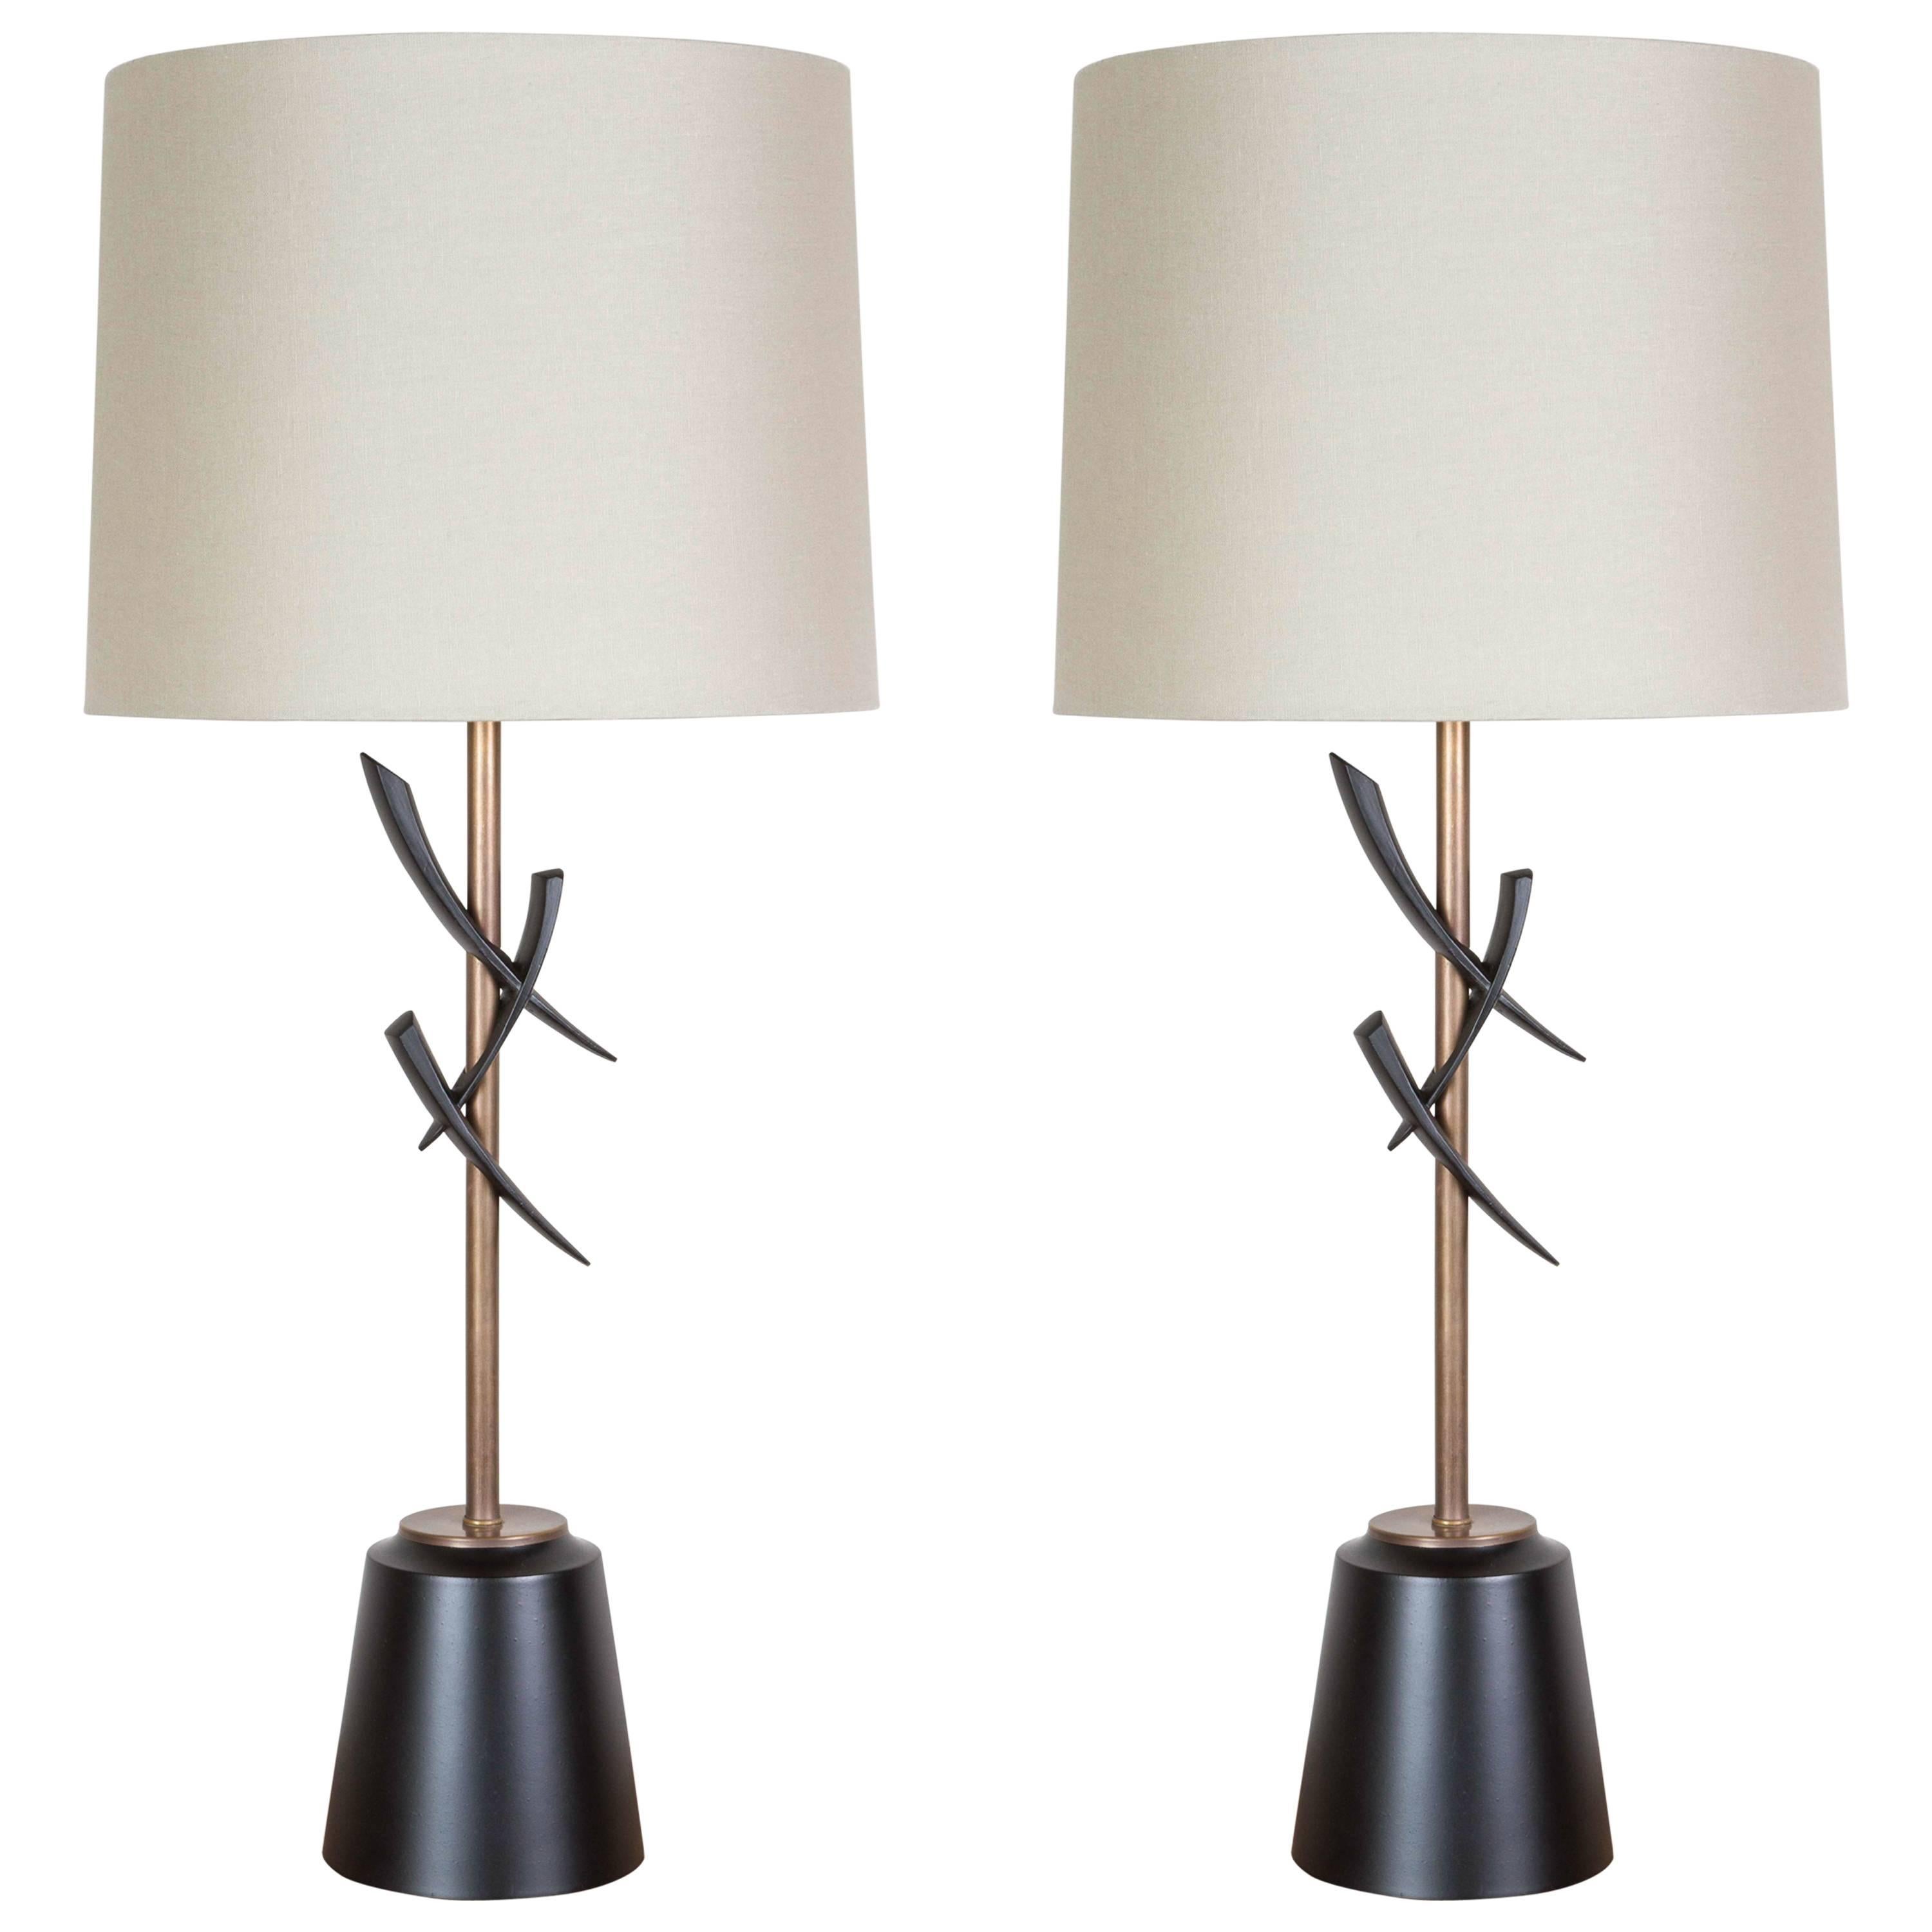 Pair of Japanese Style Table Lamps